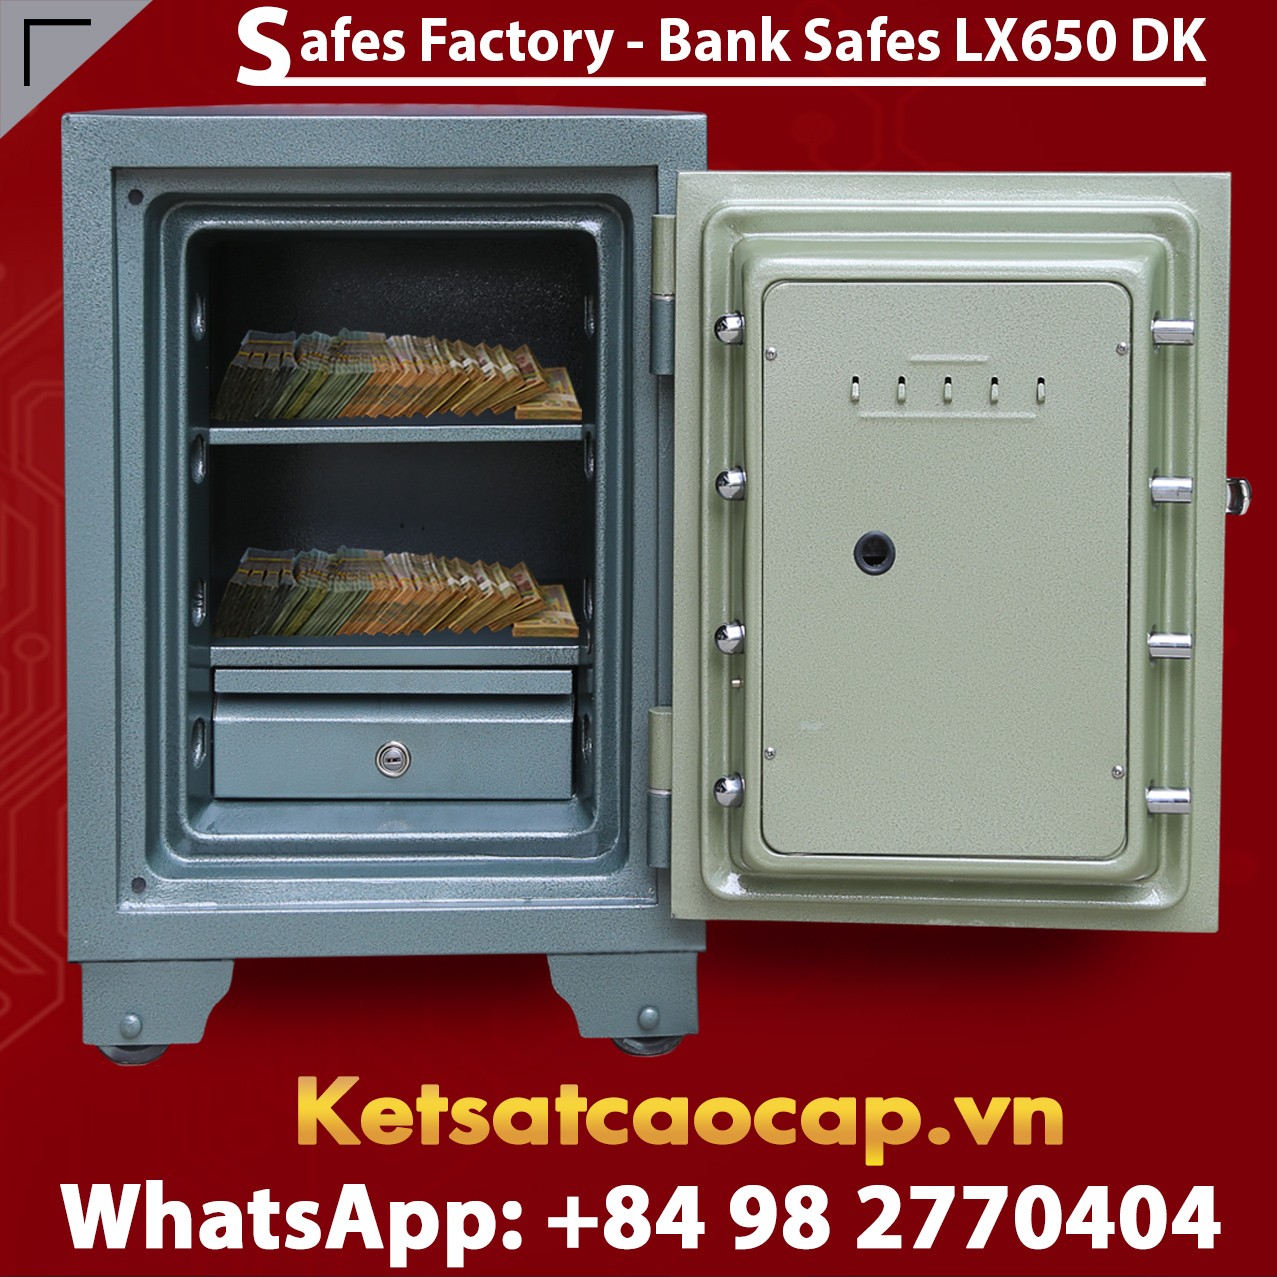 Bank Safes Box made in Viet Nam